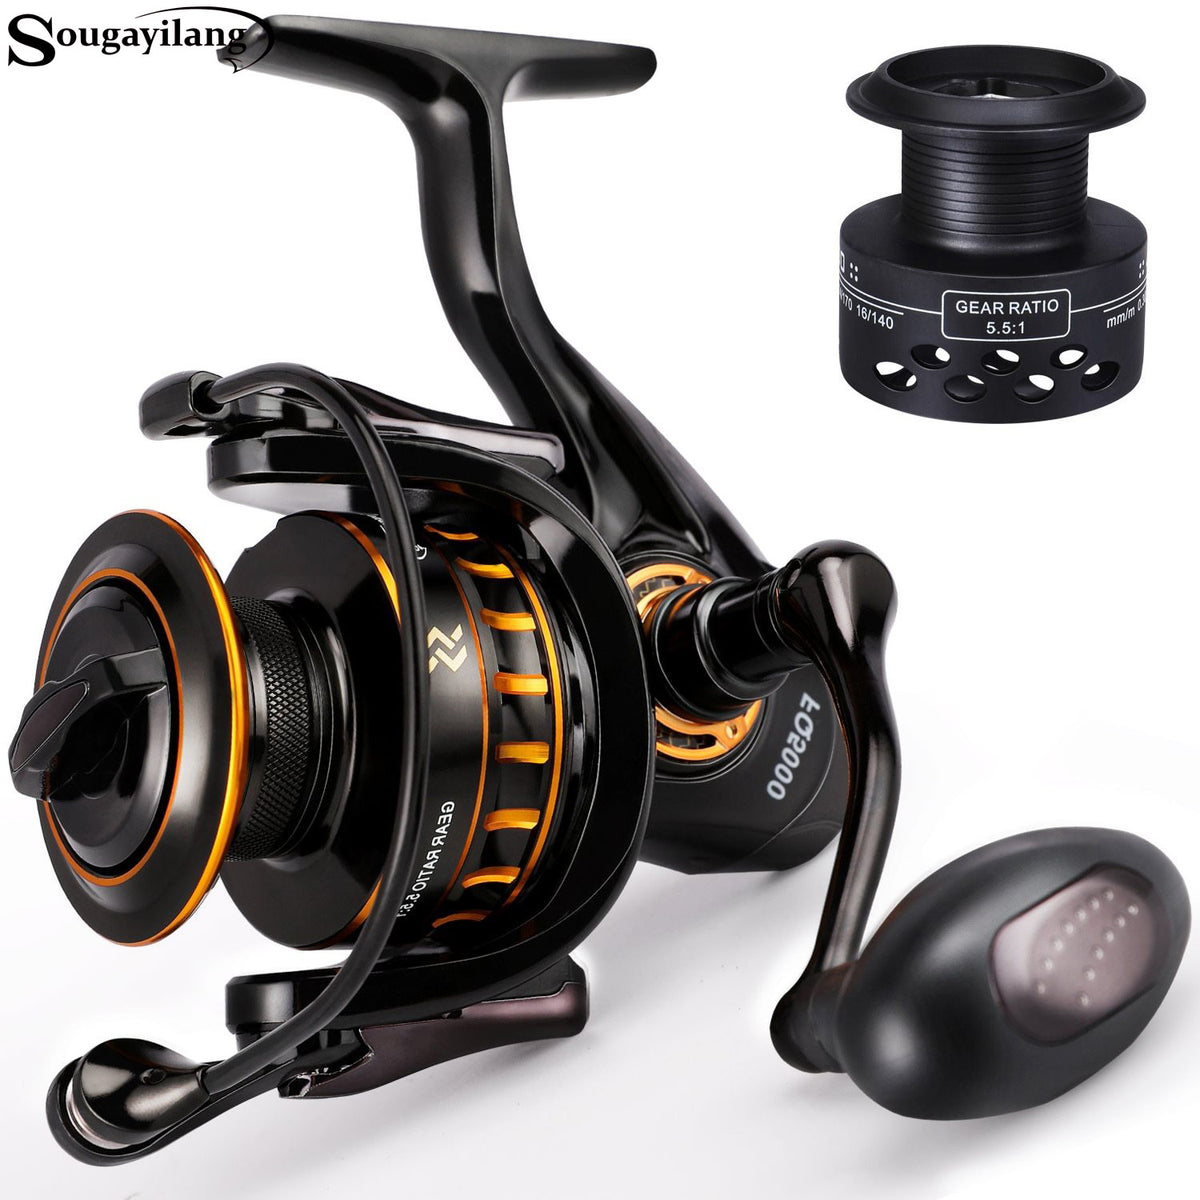 Sougayilang 2000 3000 Spinning Fishing Reels 5.2:1 High Speed Ratio Max  Drag 8kg EVA Handle Fishing Reels with Mysterious Gifts - AliExpress